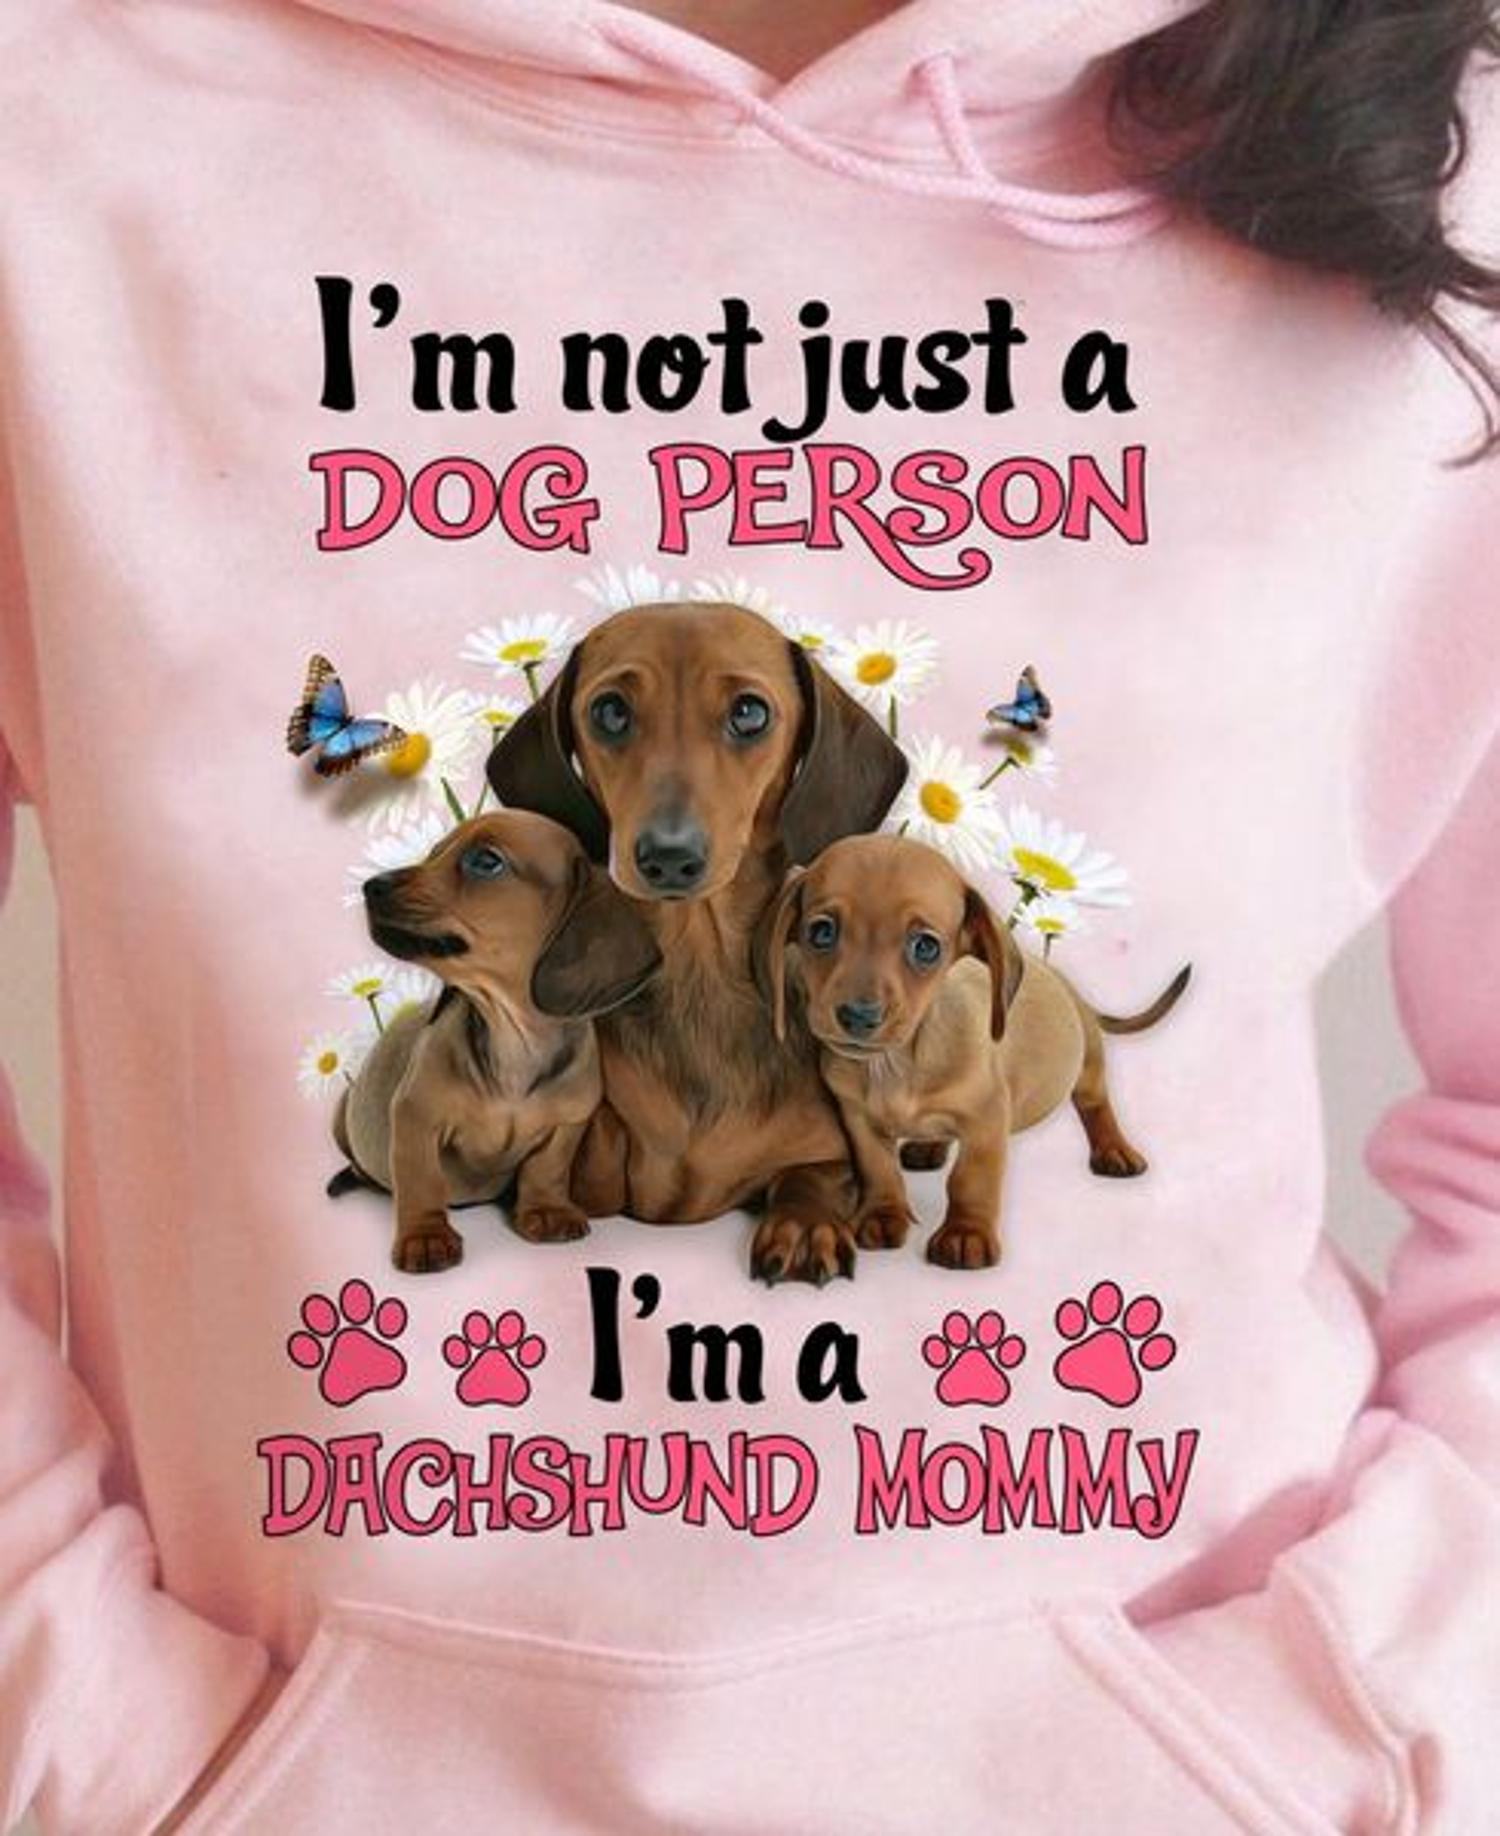 I'm not just a dog person I'm a Dachshund mommy